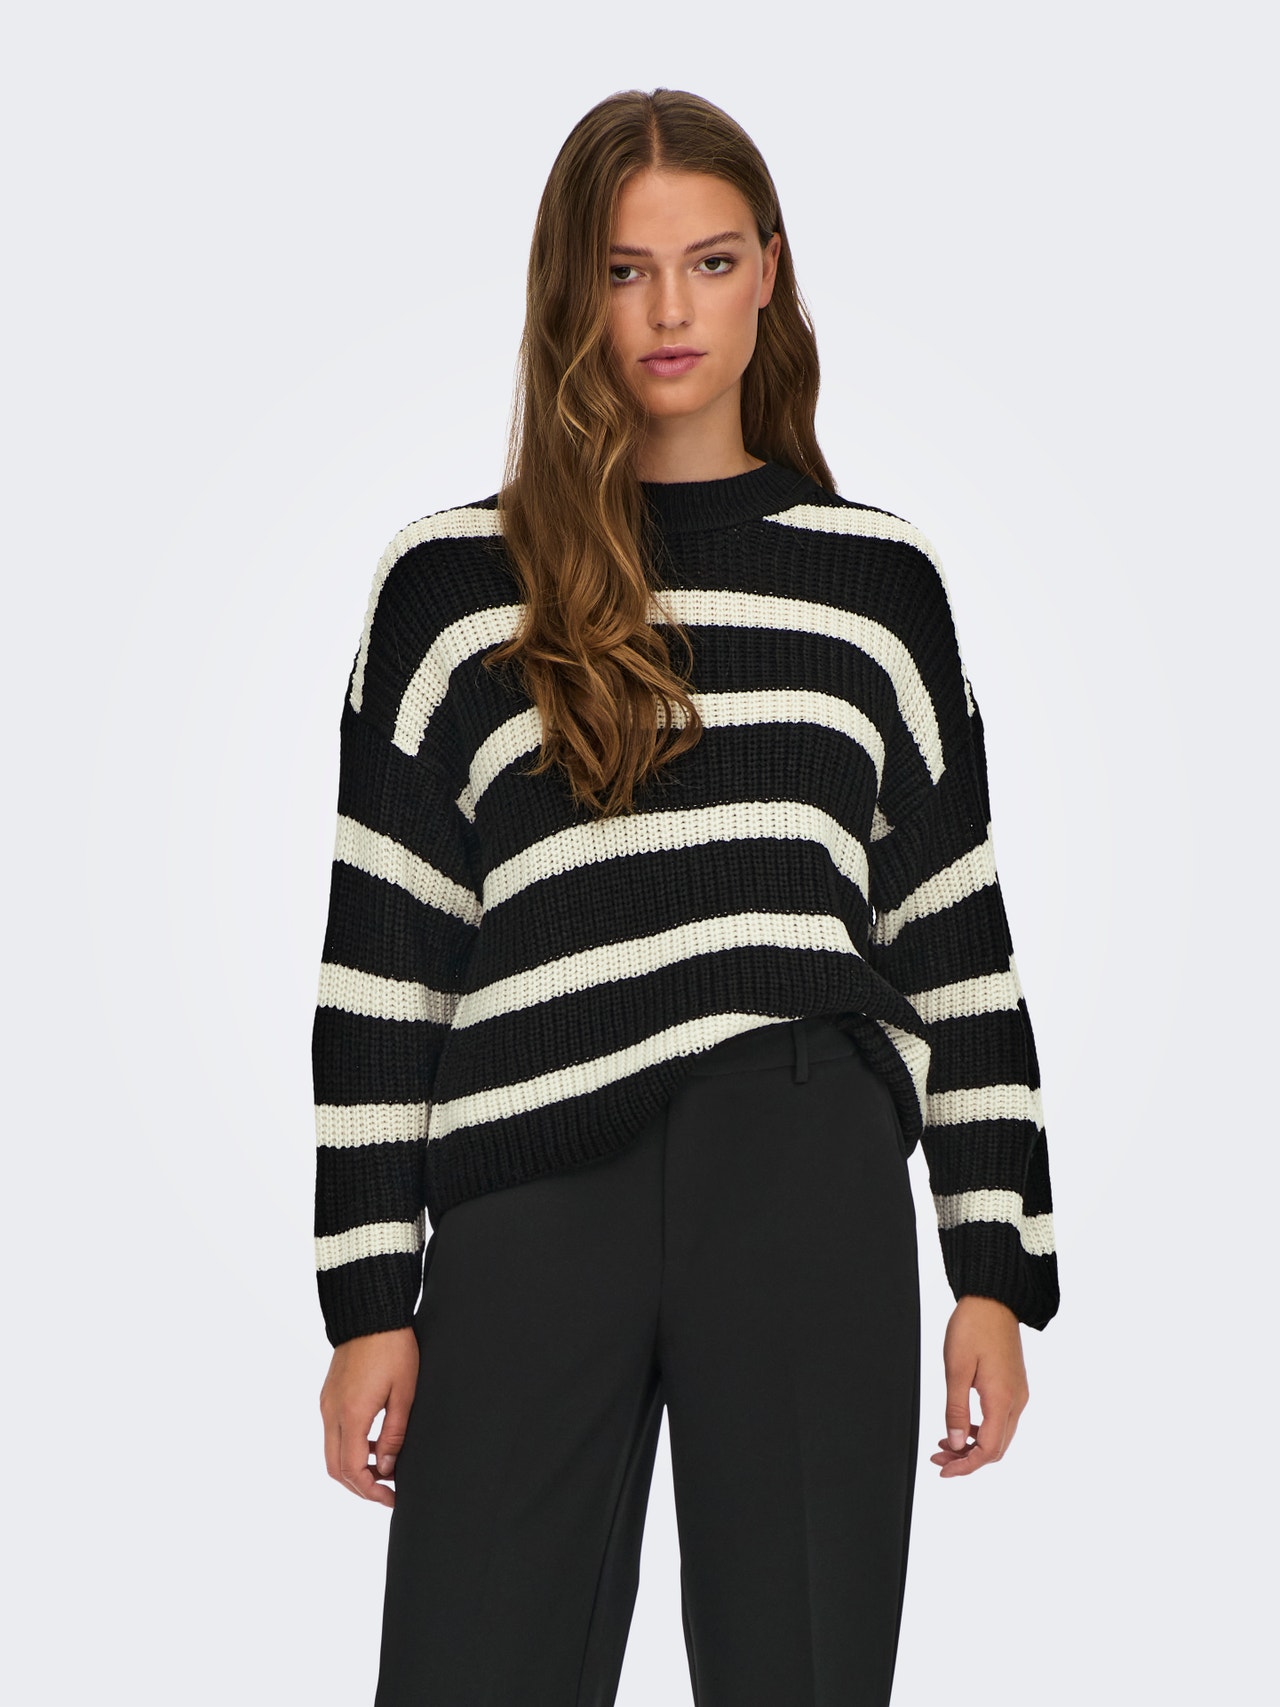 ONLY Striped Knitted Pullover -Black - 15264902